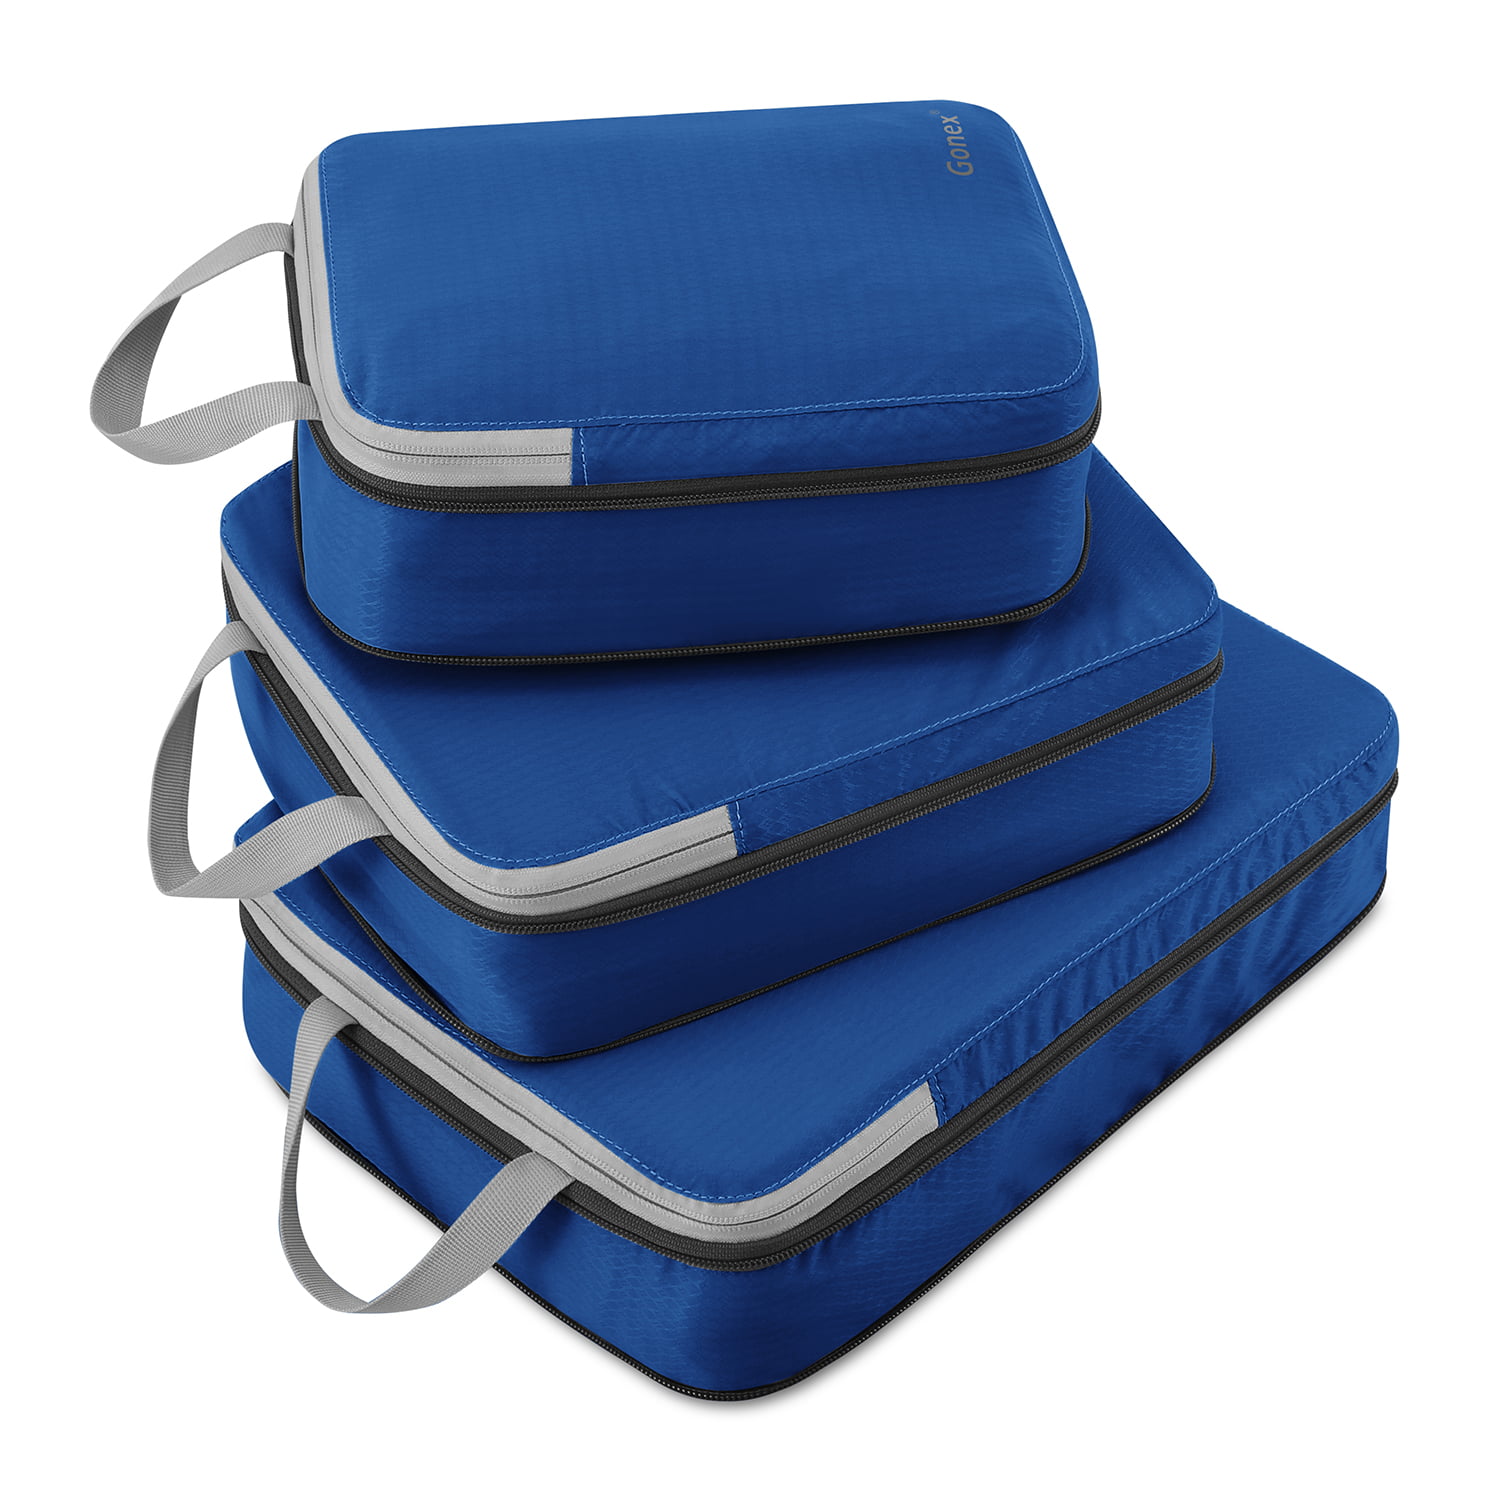 Gonex Travel Organizers Upgraded 3PCS L+M+S Compression Packing Cubes Blue 